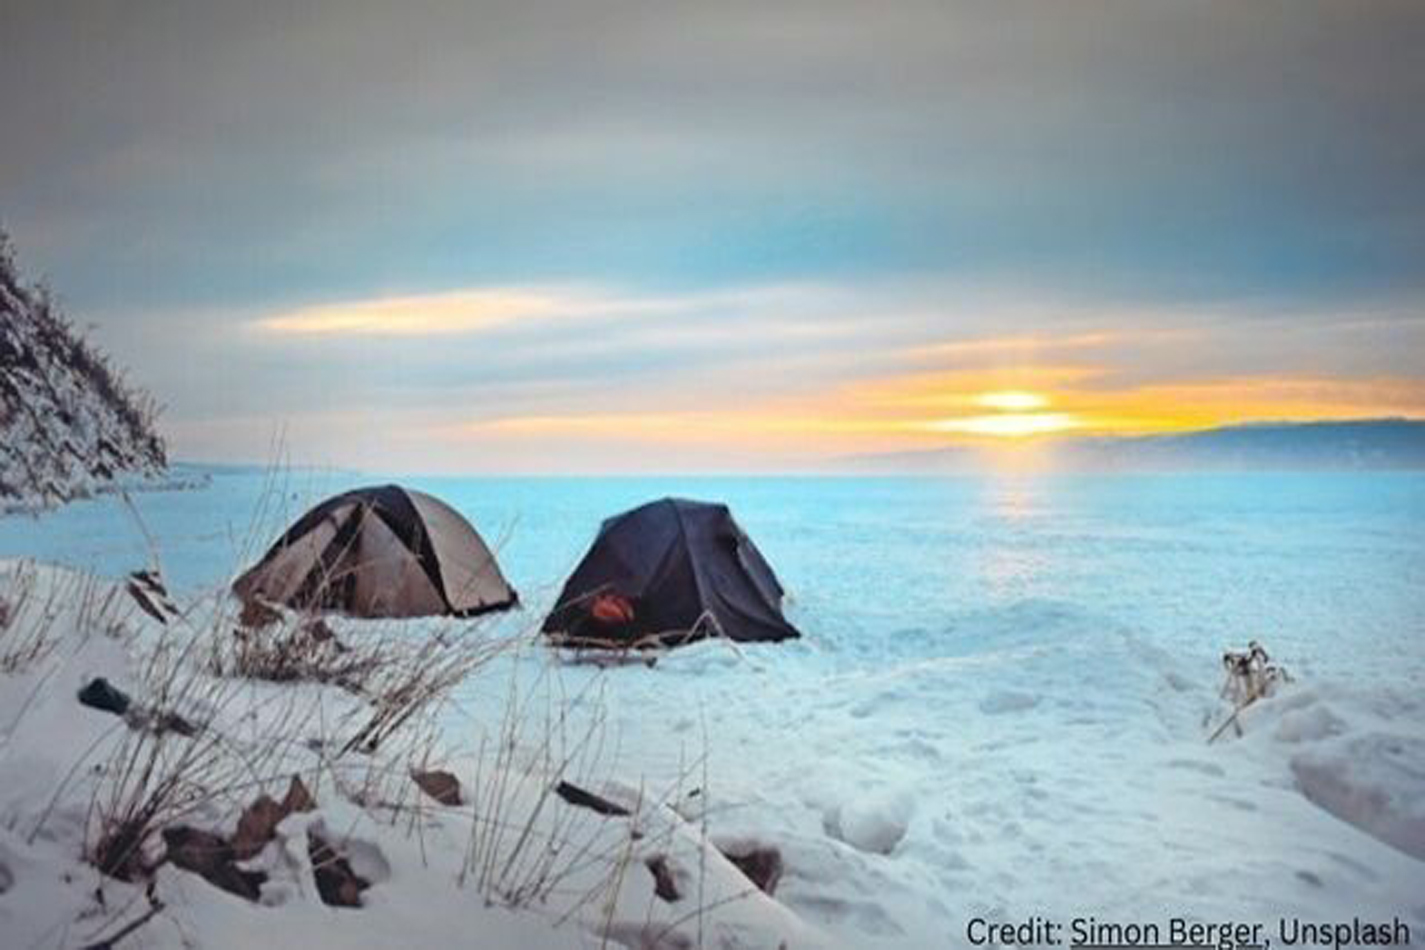 image alt text or alt attributes: Winter Camping, Sunset